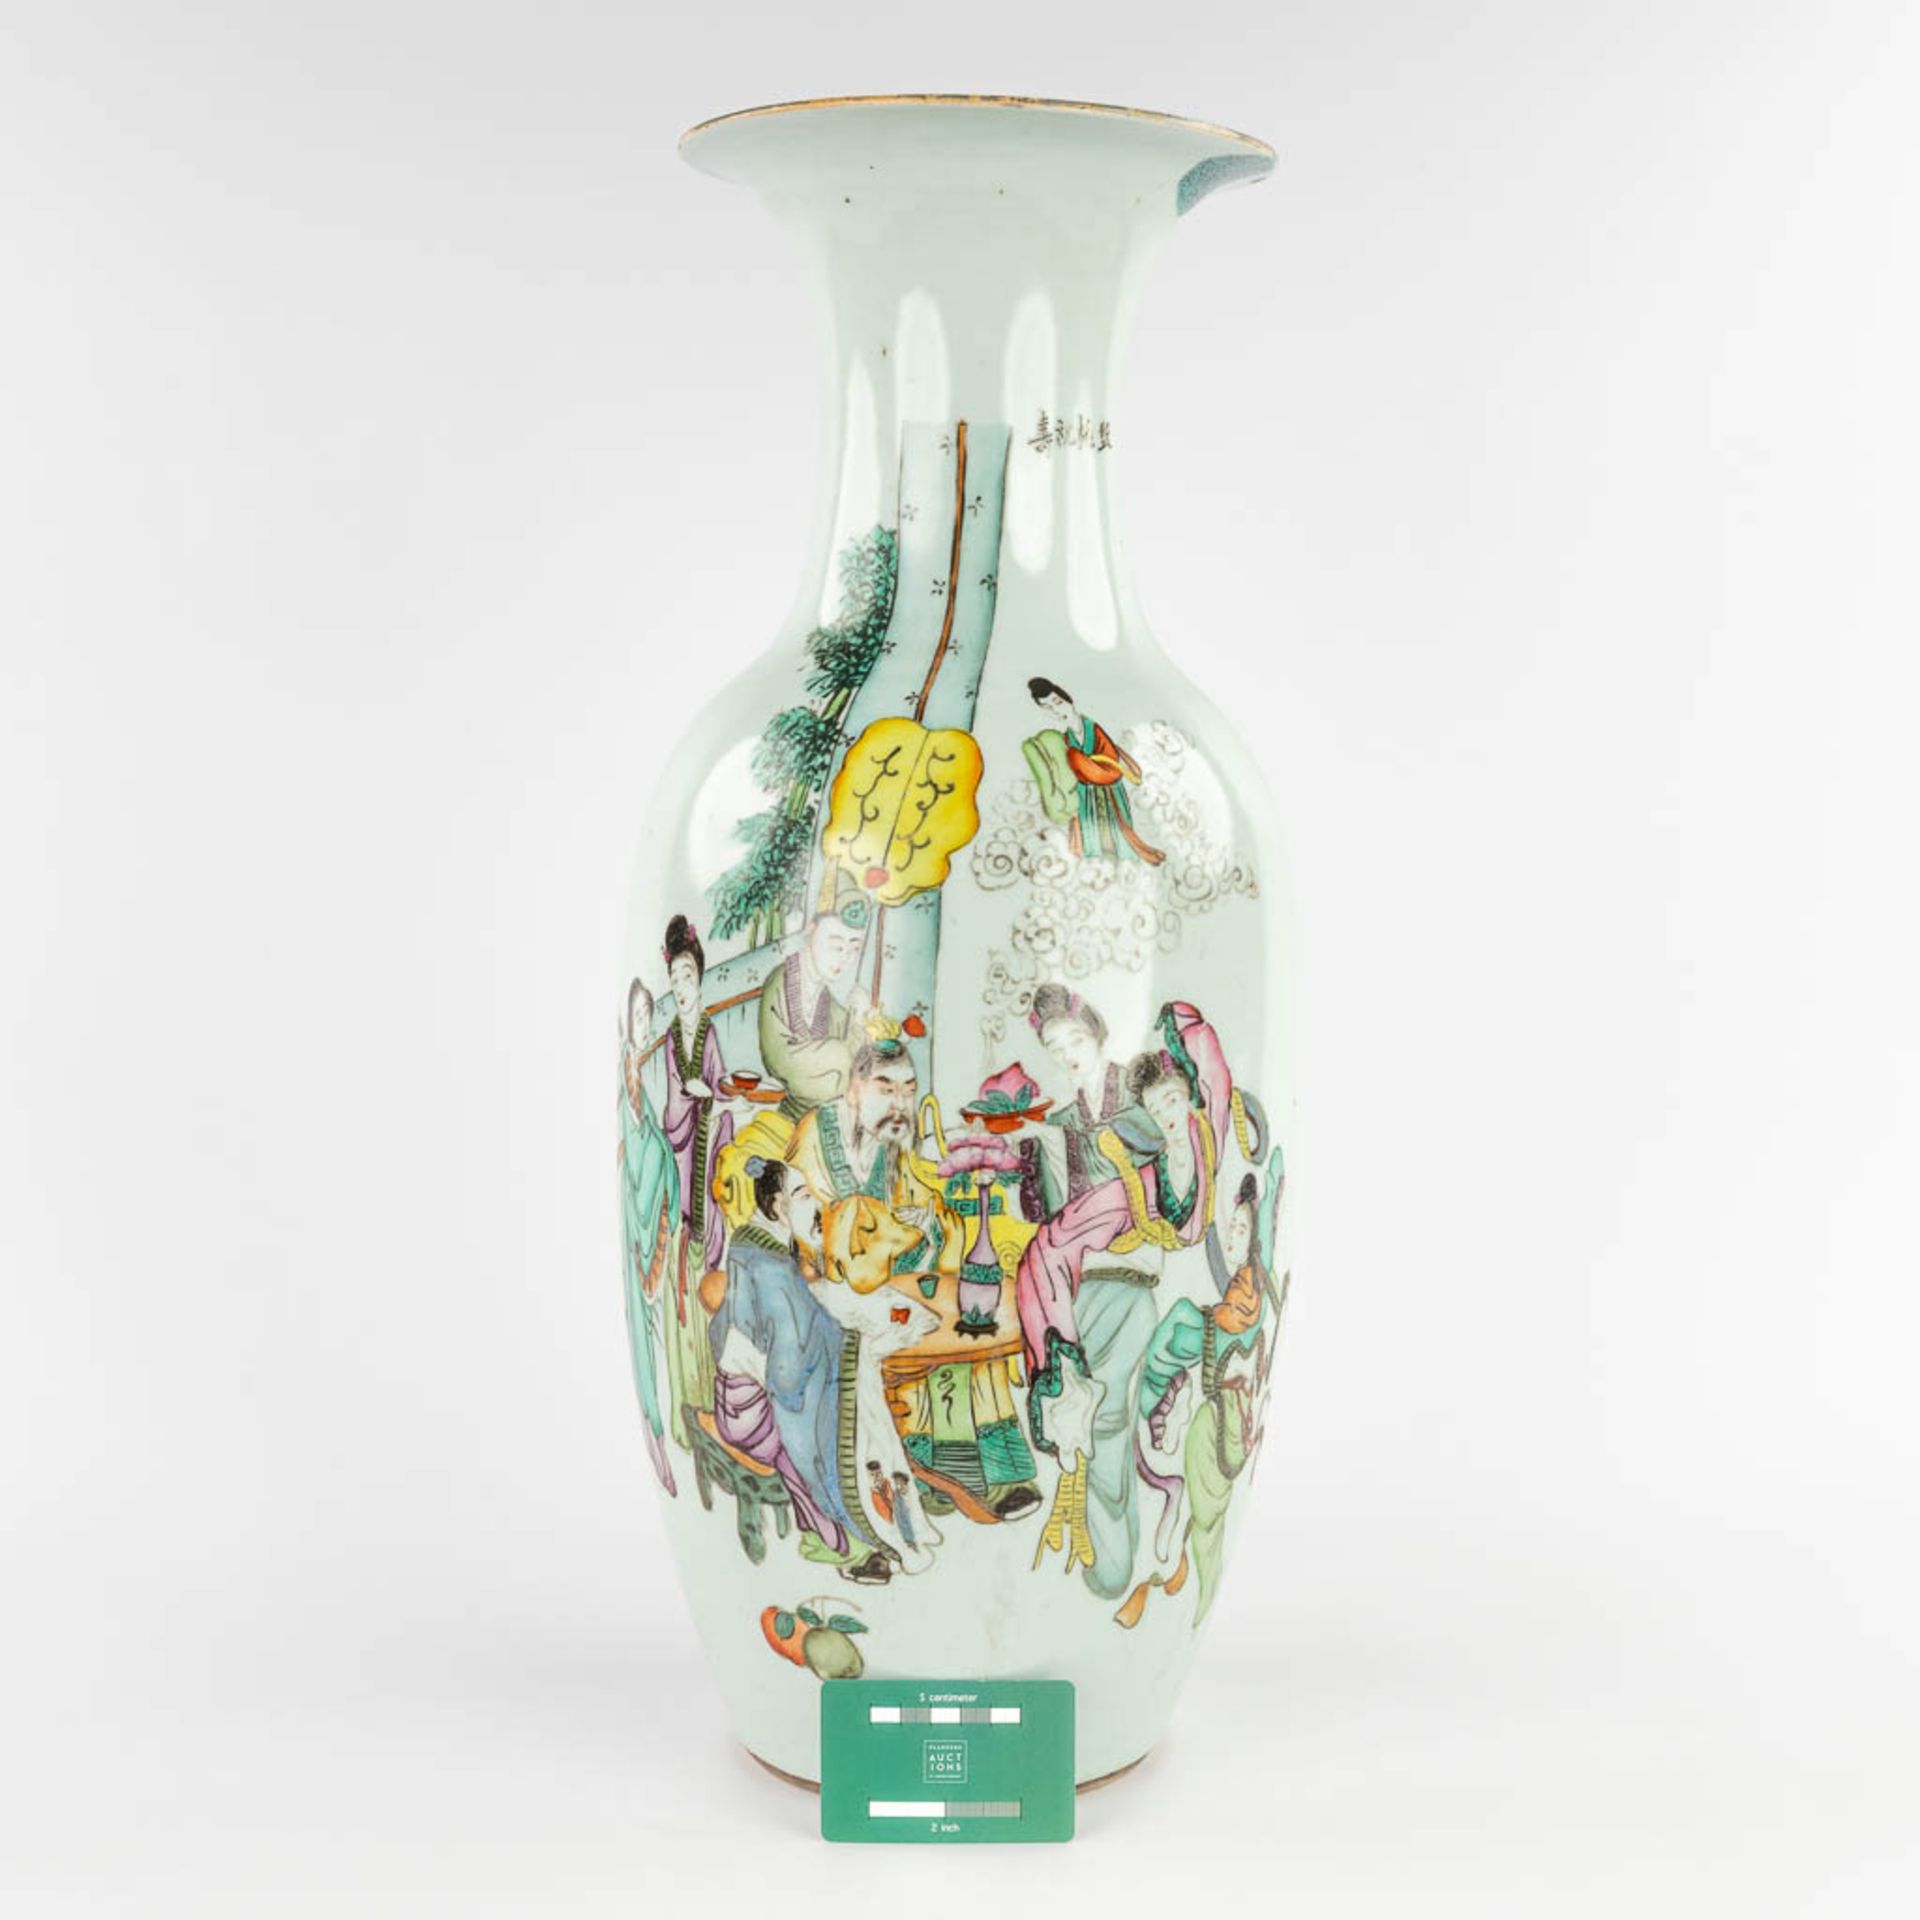 A Chinese vase, decorated with ladies and an emperor. 19th/20th C. (H:57 x D:23 cm) - Image 2 of 14